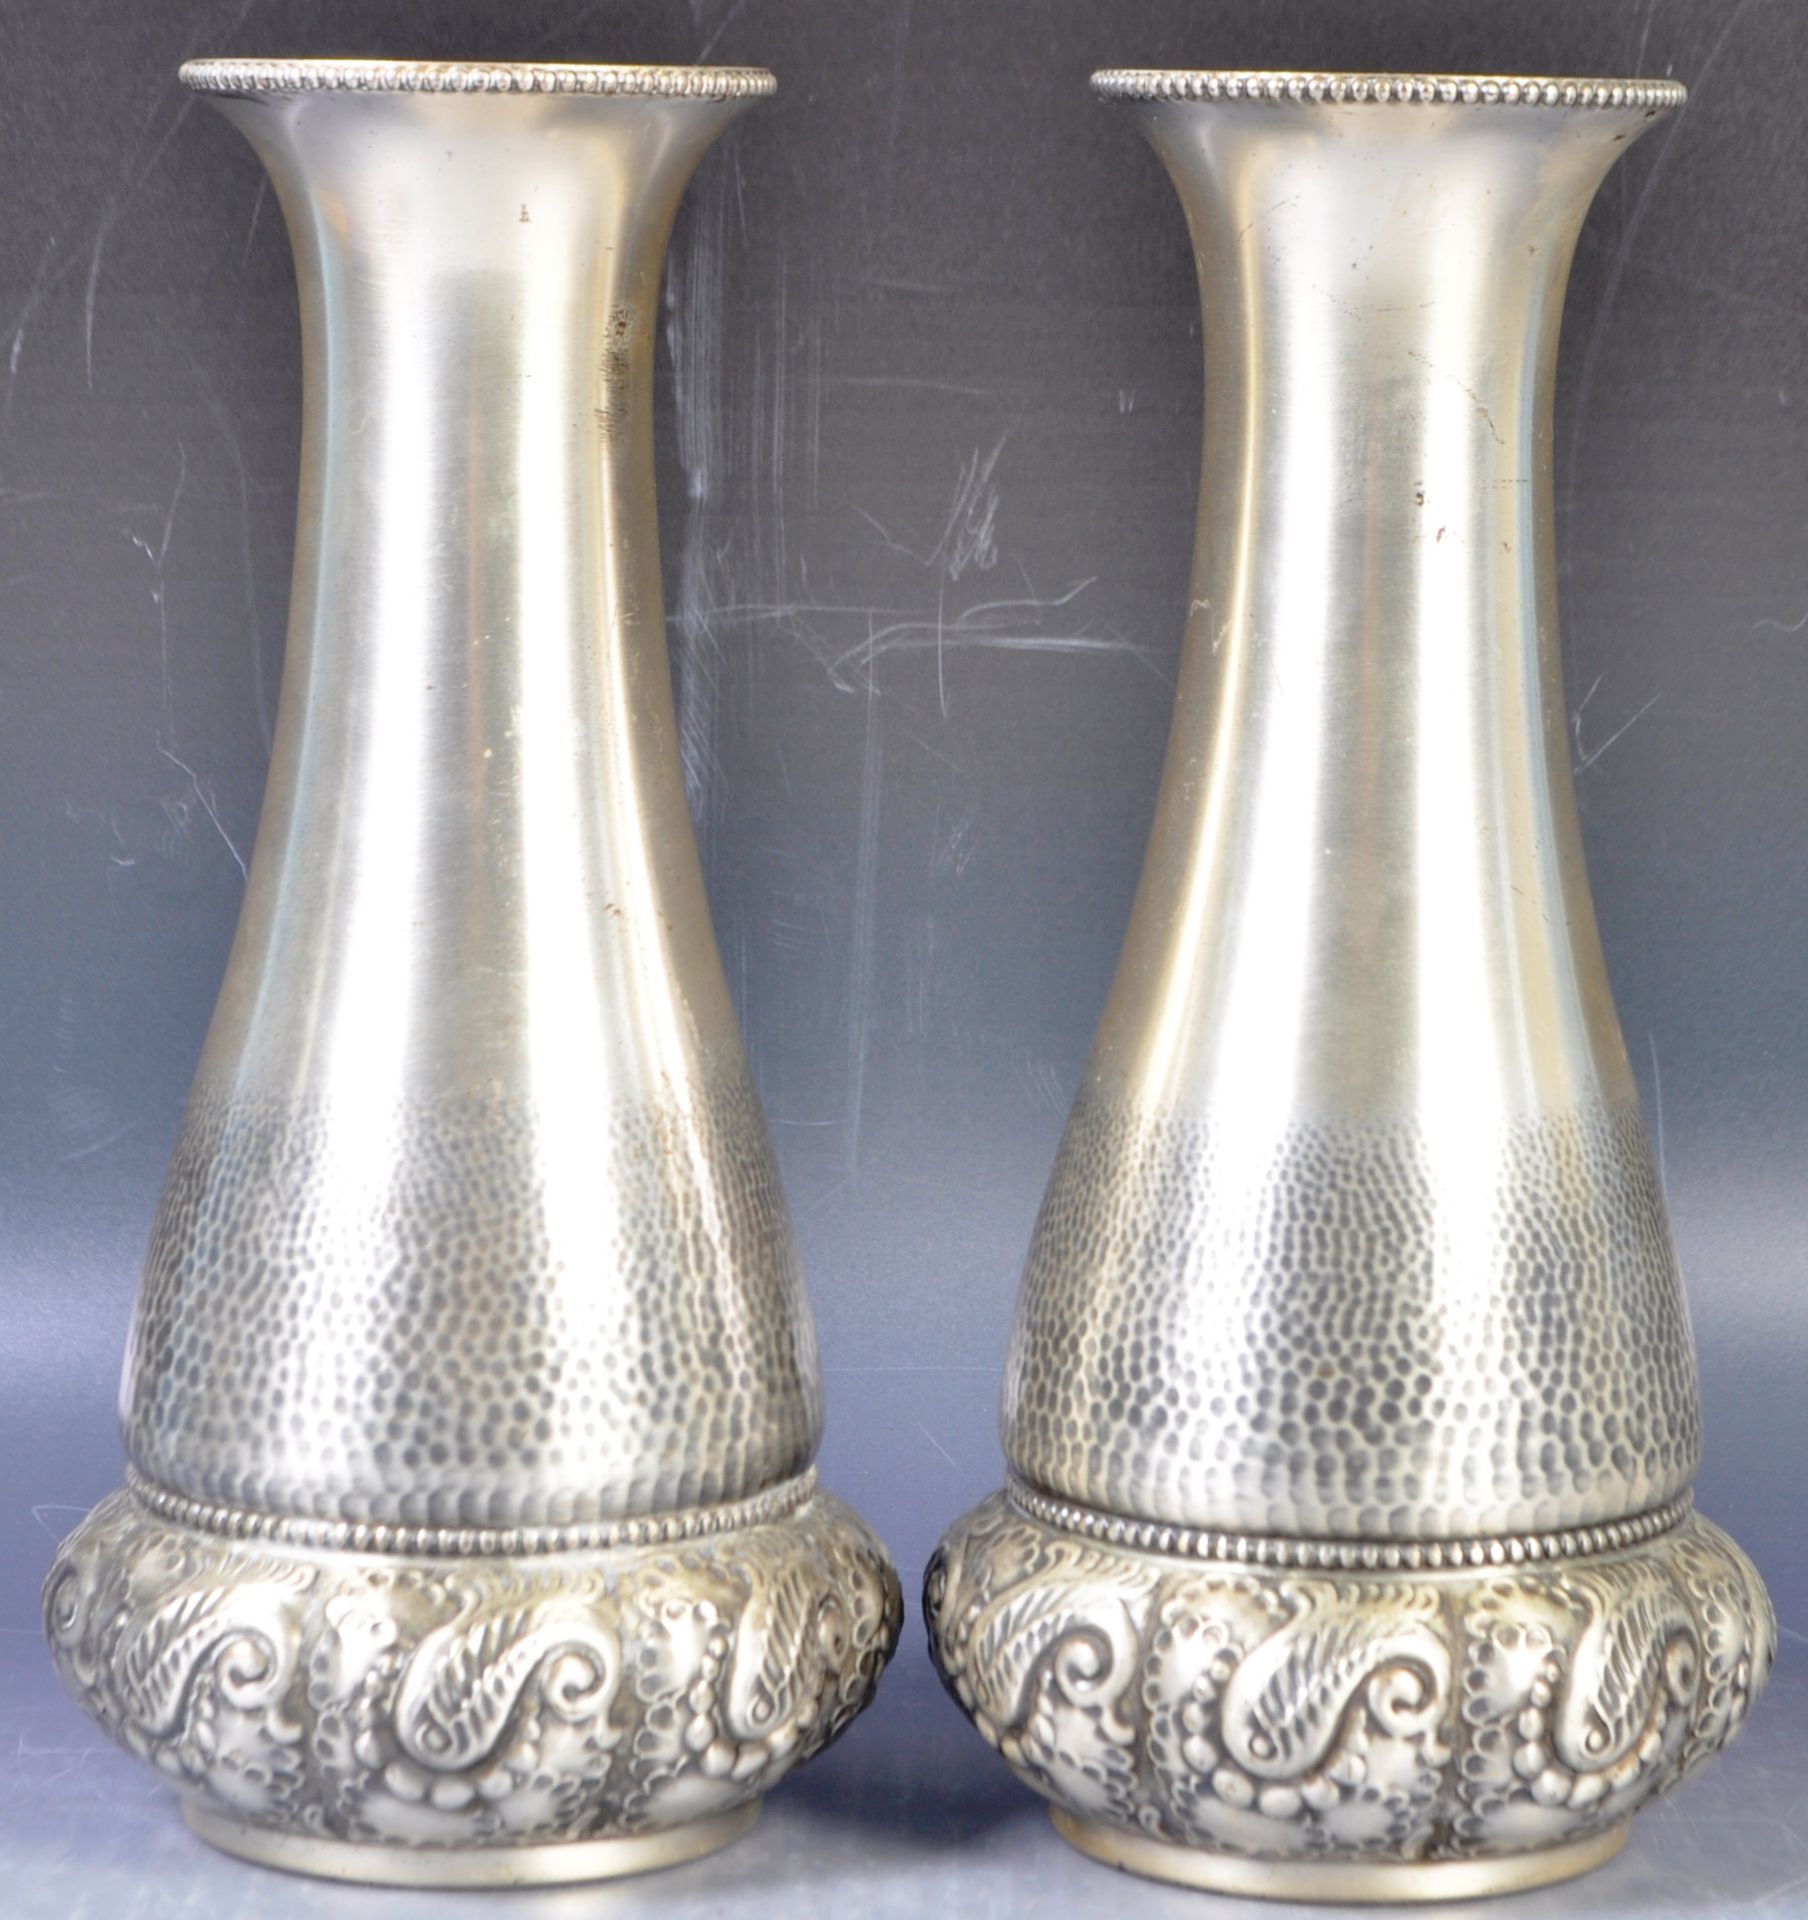 PAIR OF EARLY 20TH CENTURY WMF REPOUSSE DECORATED VASES